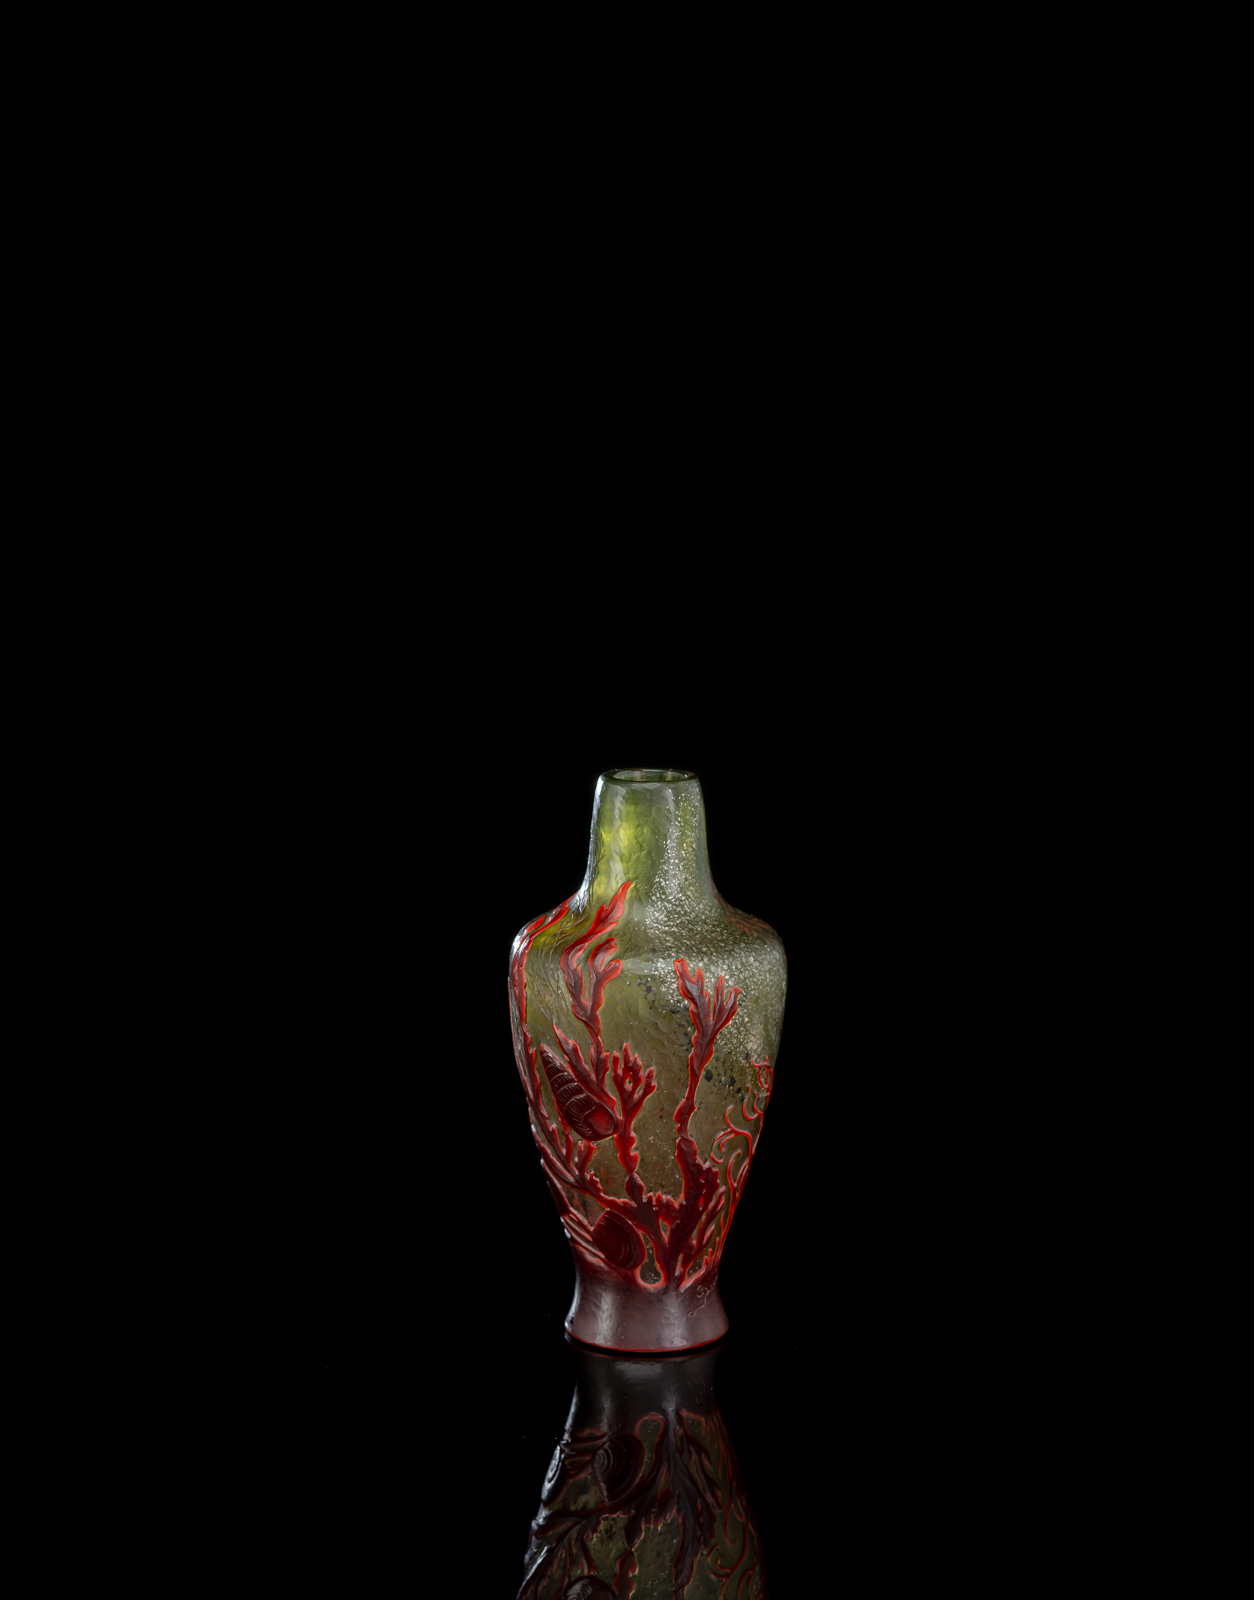 Engraved, silver and red mottled glass, red overlay with acid-etched seaweed and shells. Etched signature 